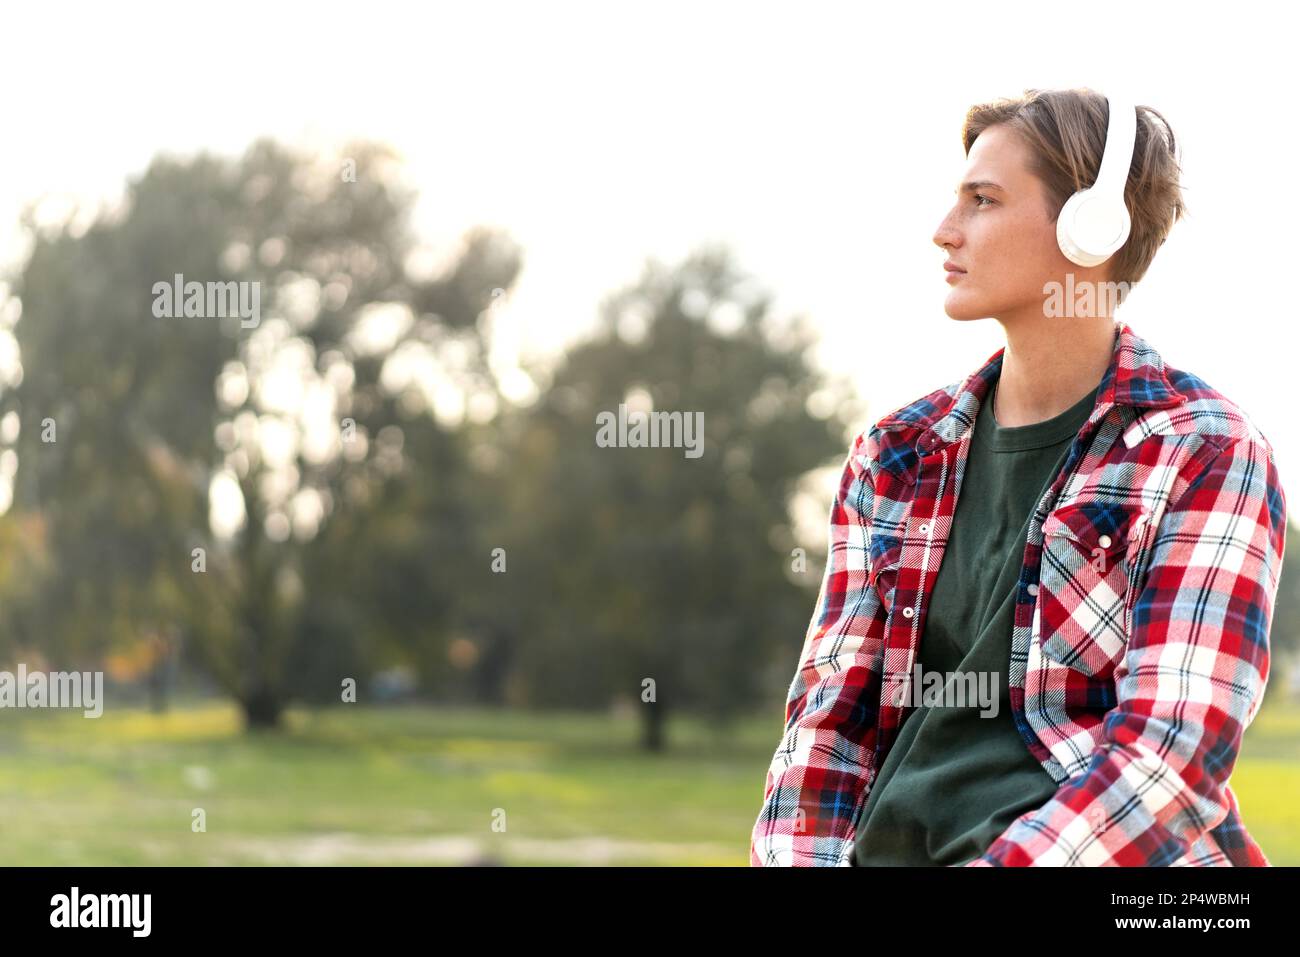 Portrait woman with short hair wearing plaid shirt and headphones outdoors. Stock Photo